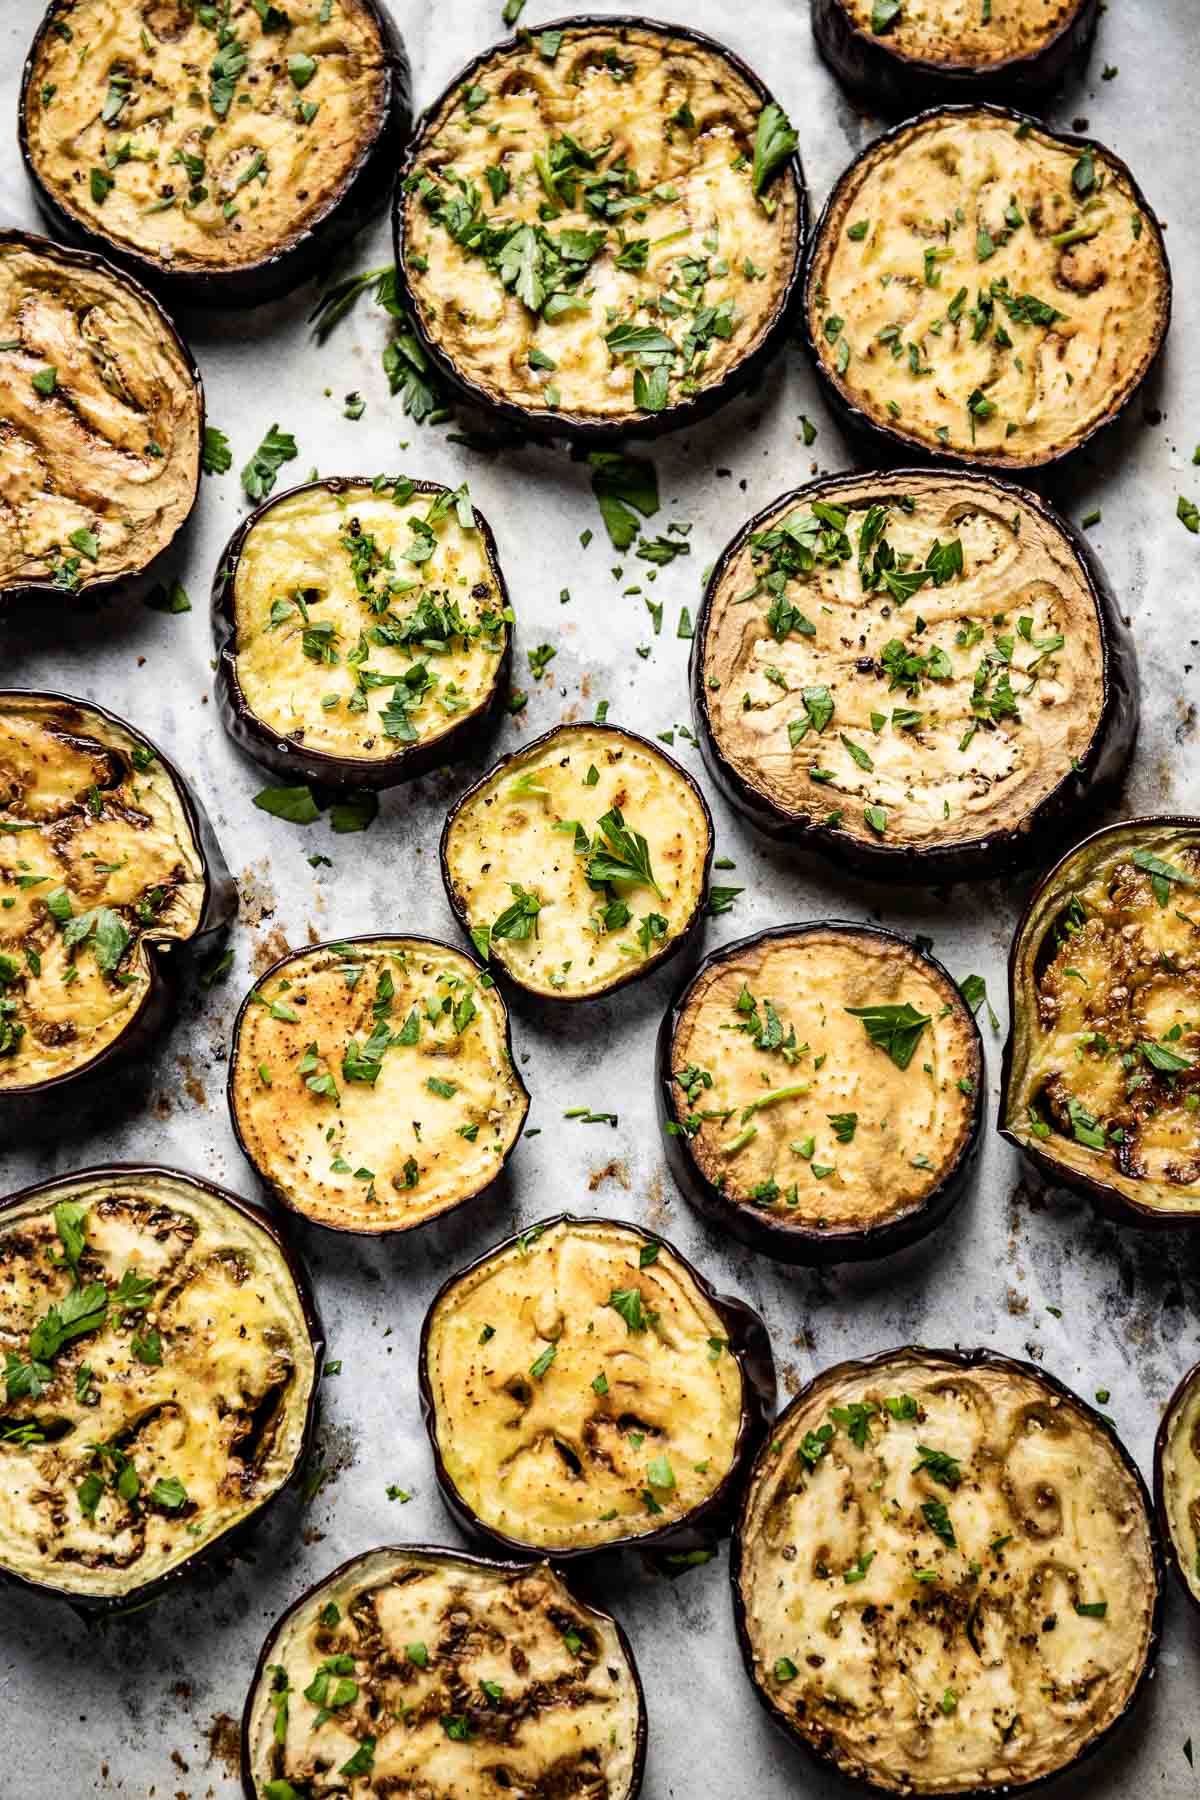 Baked aubergine slices on a sheet pan from the top view